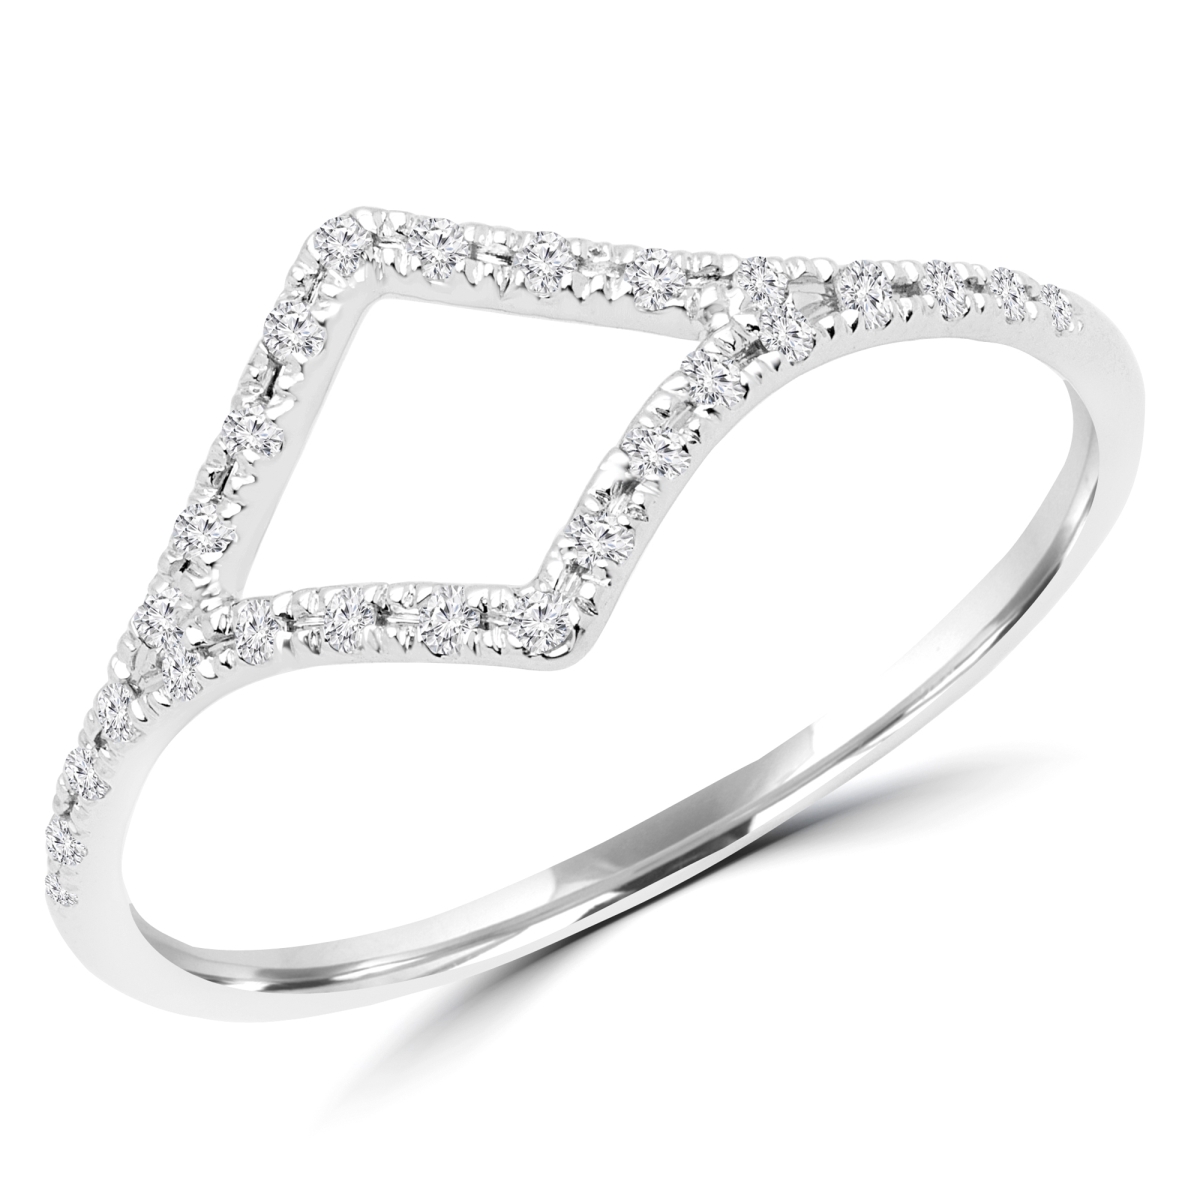 Picture of Majesty Diamonds MDR170053-3.25 0.1 CTW Round Diamond Cocktail Ring in 14K White Gold - 3.25